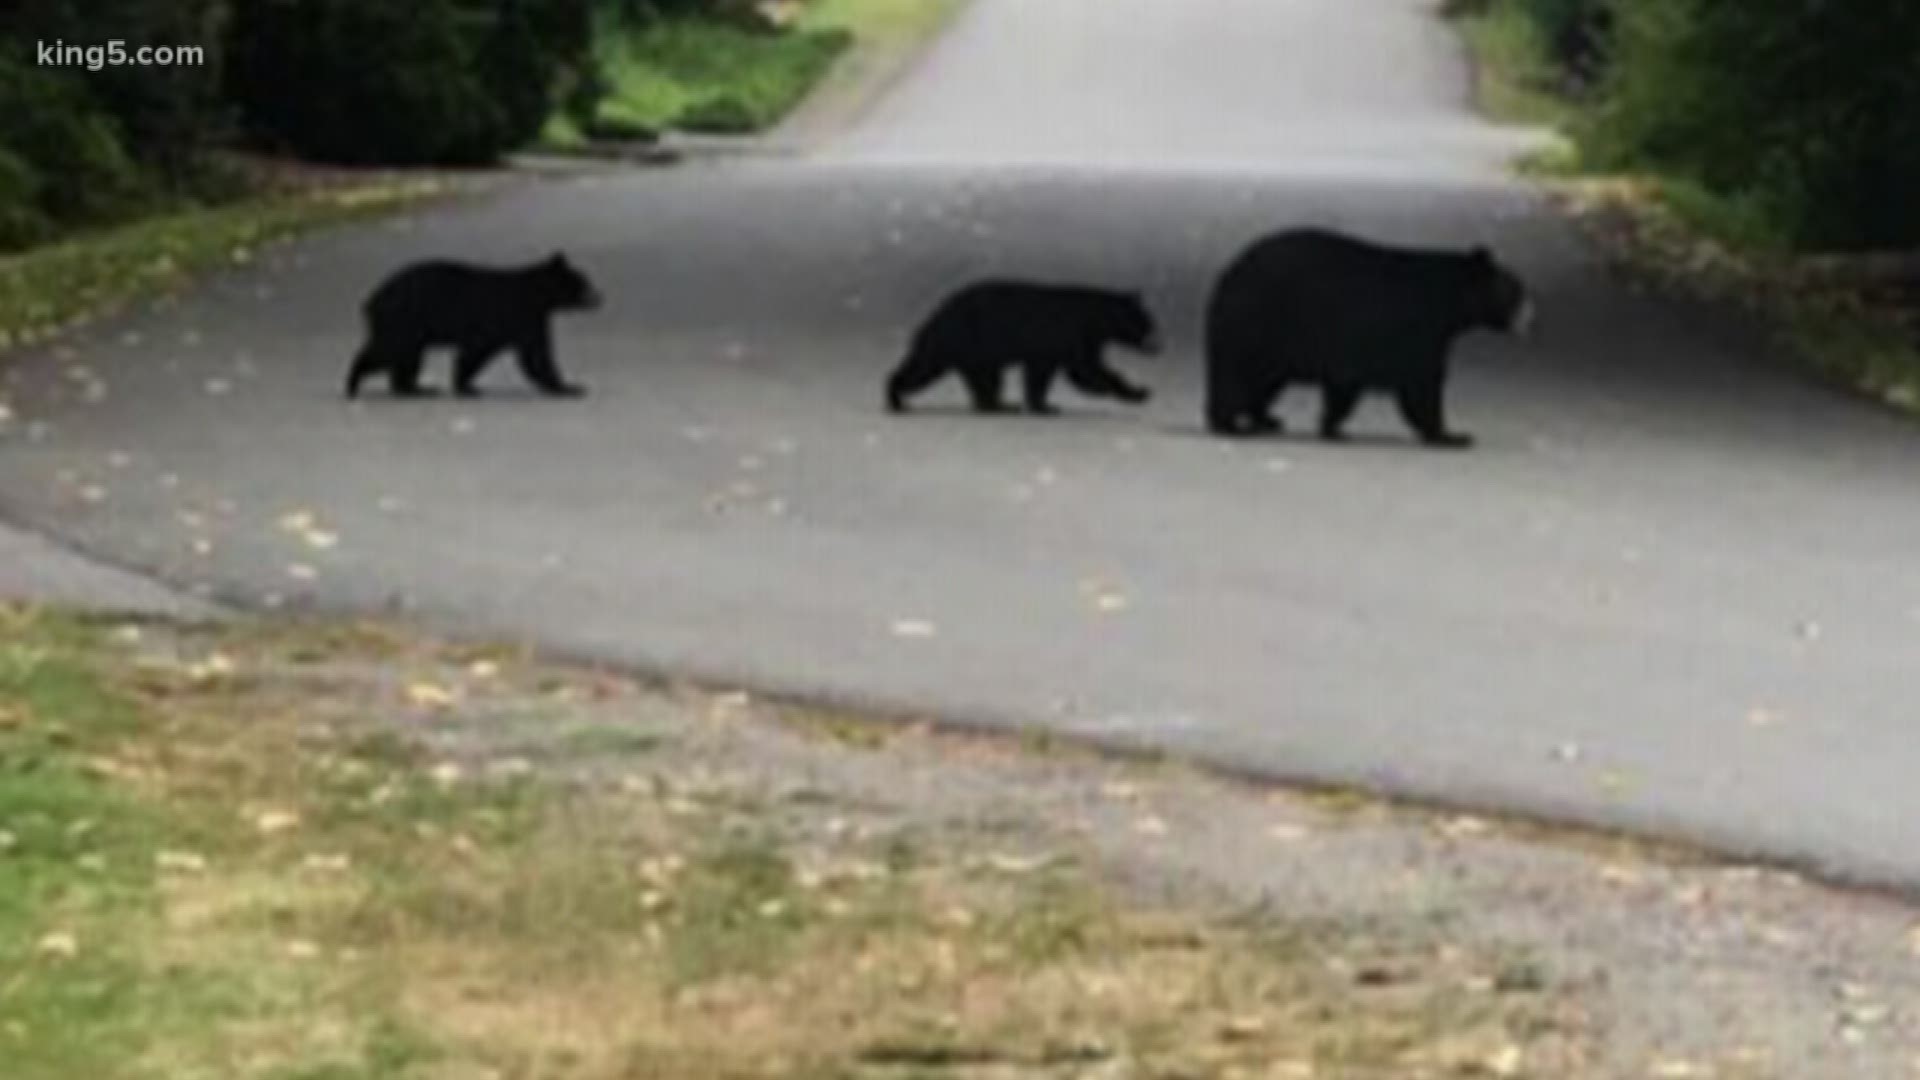 In less than two weeks, the Woodland Park Zoo has received 700 reports of carnivores roaming around the Puget Sound region. The zoo is asking the public to submit sightings for research.